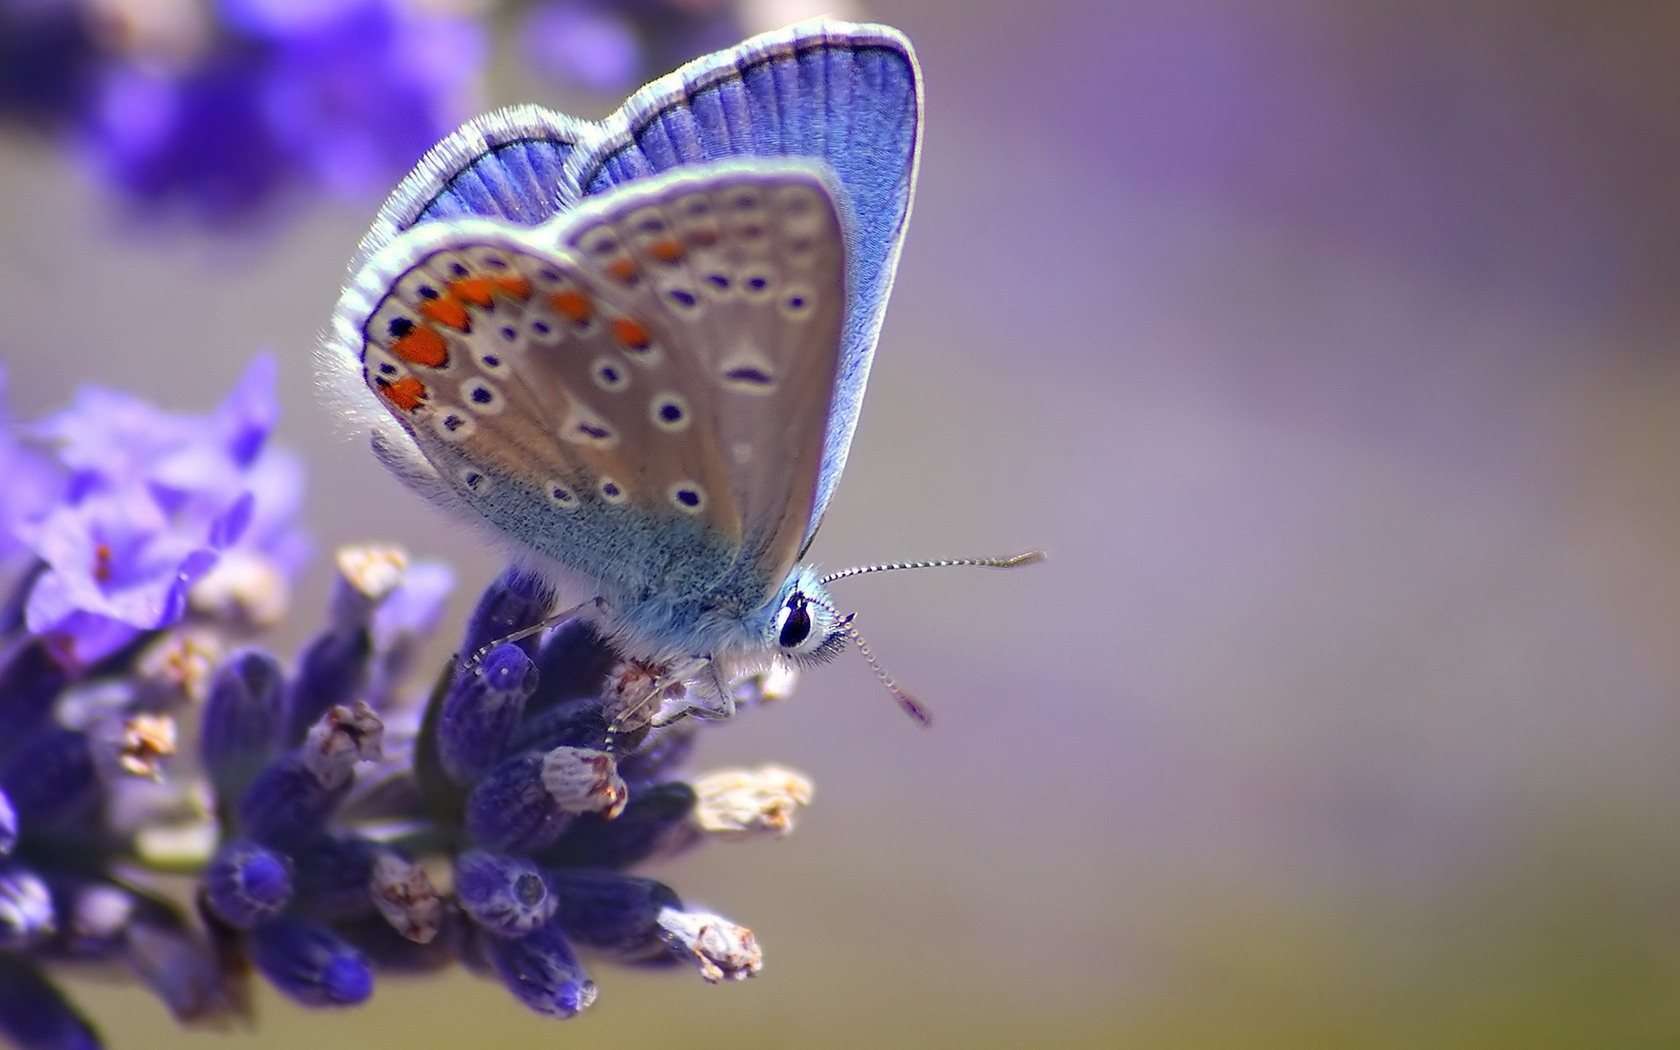 Blue Butterfly Wallpaper At GetHDpic